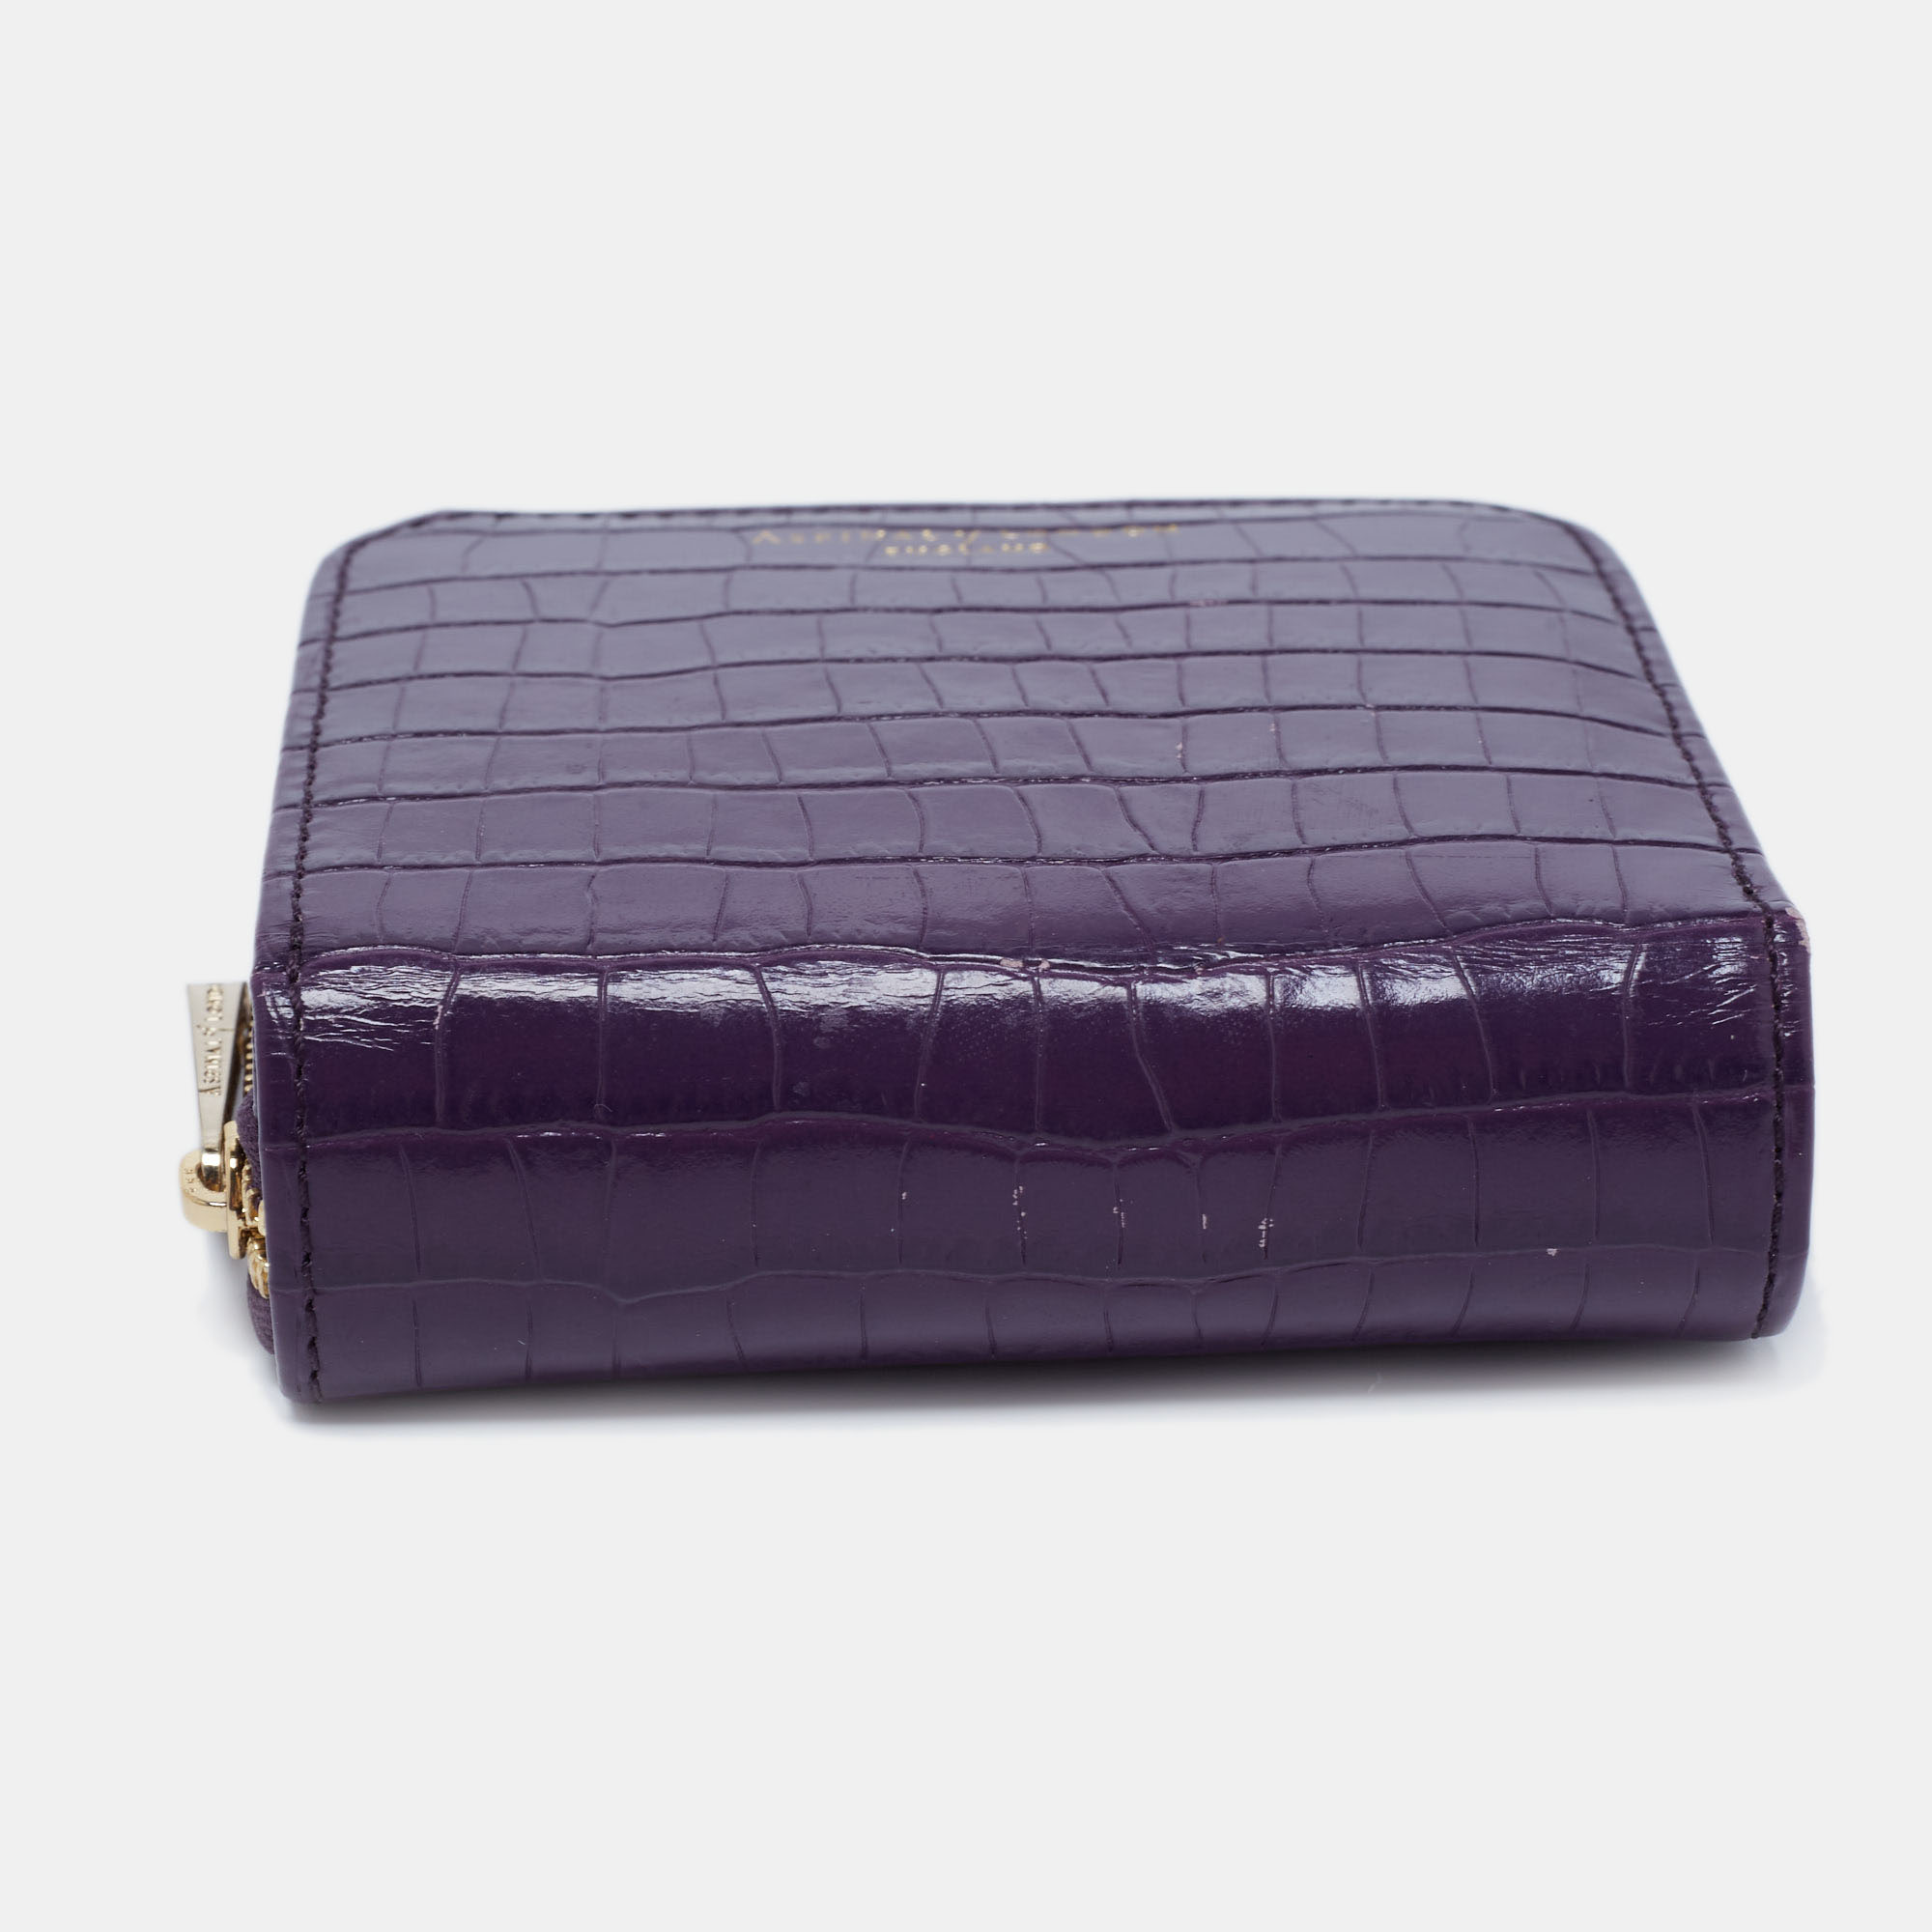 Aspinal Of London Purple Croc Embossed Leather Zip Around Compact Wallet